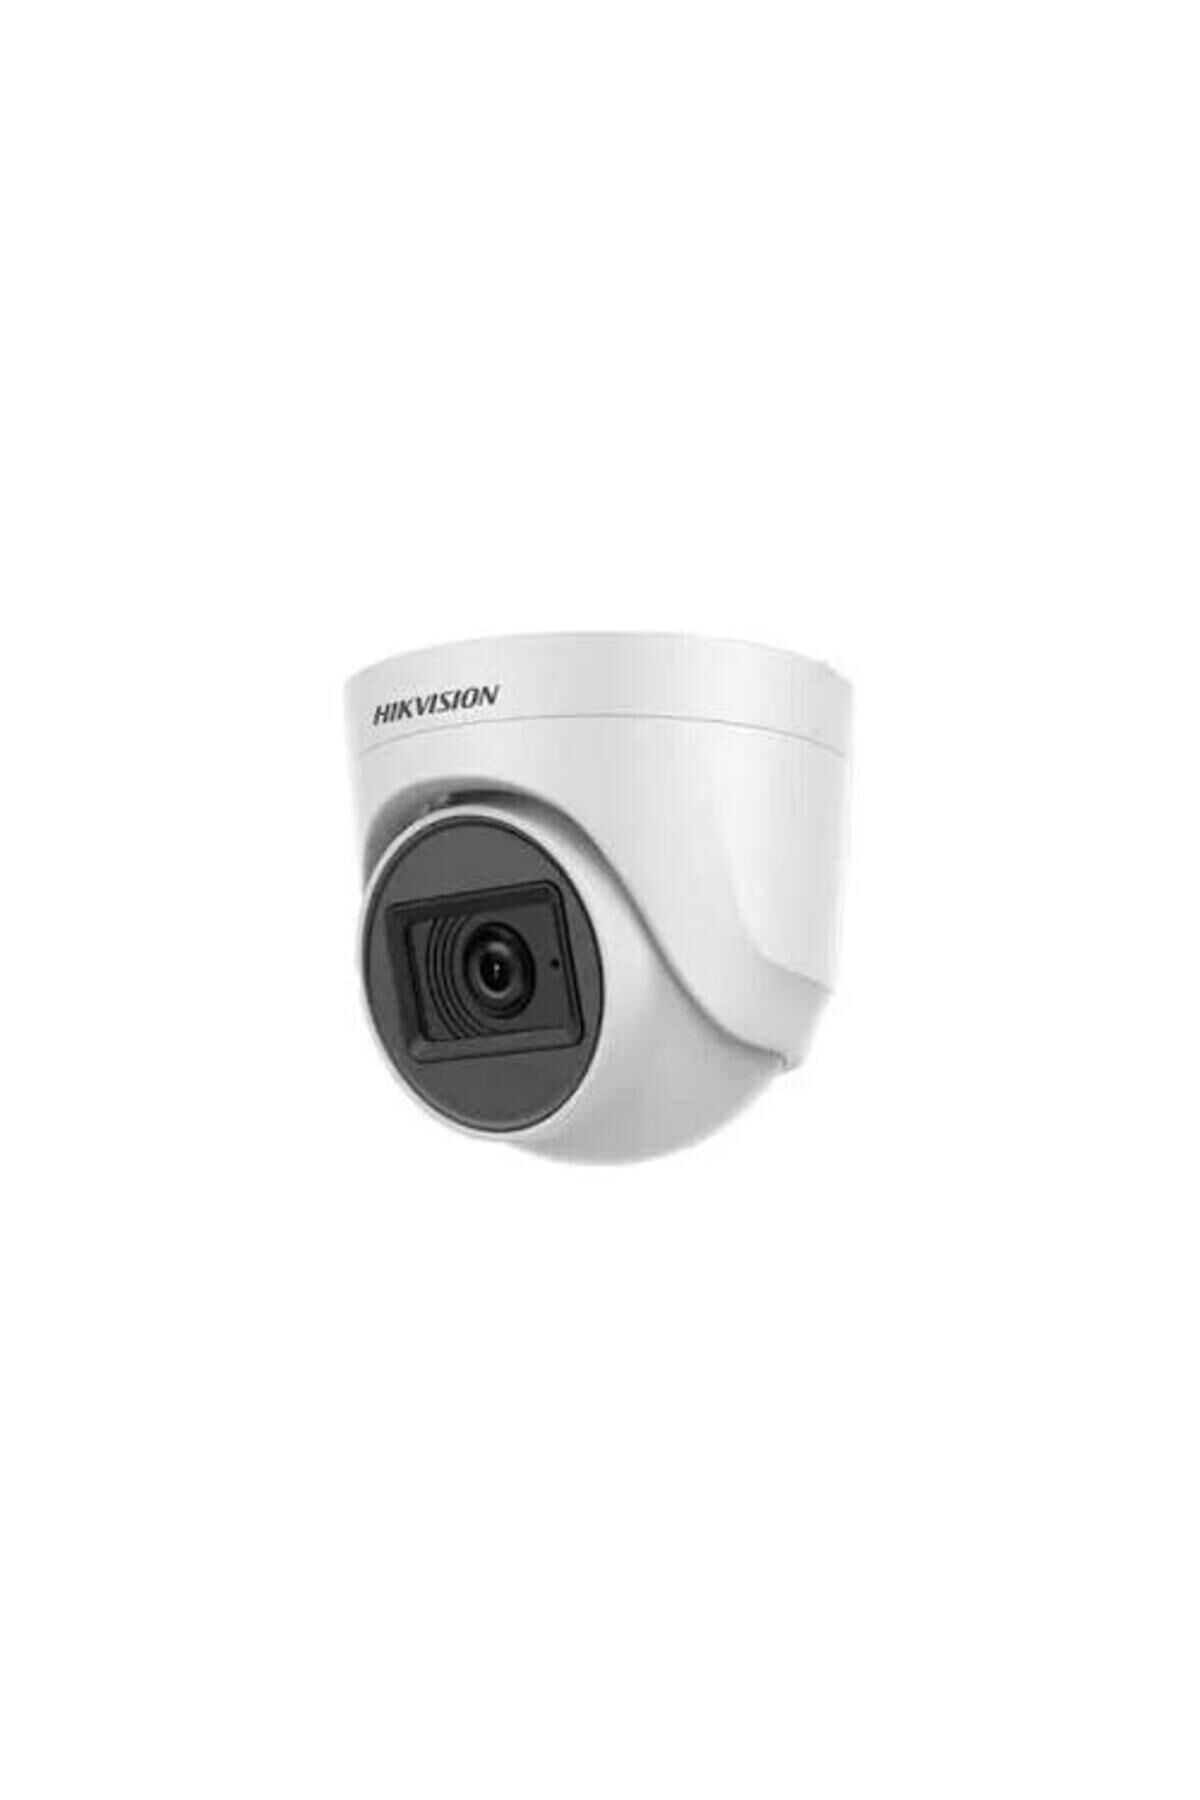 Hikvision DS-2CE76D0T-EXIPF 1080P 2 MP 2.8mm Dome AHD Kamera